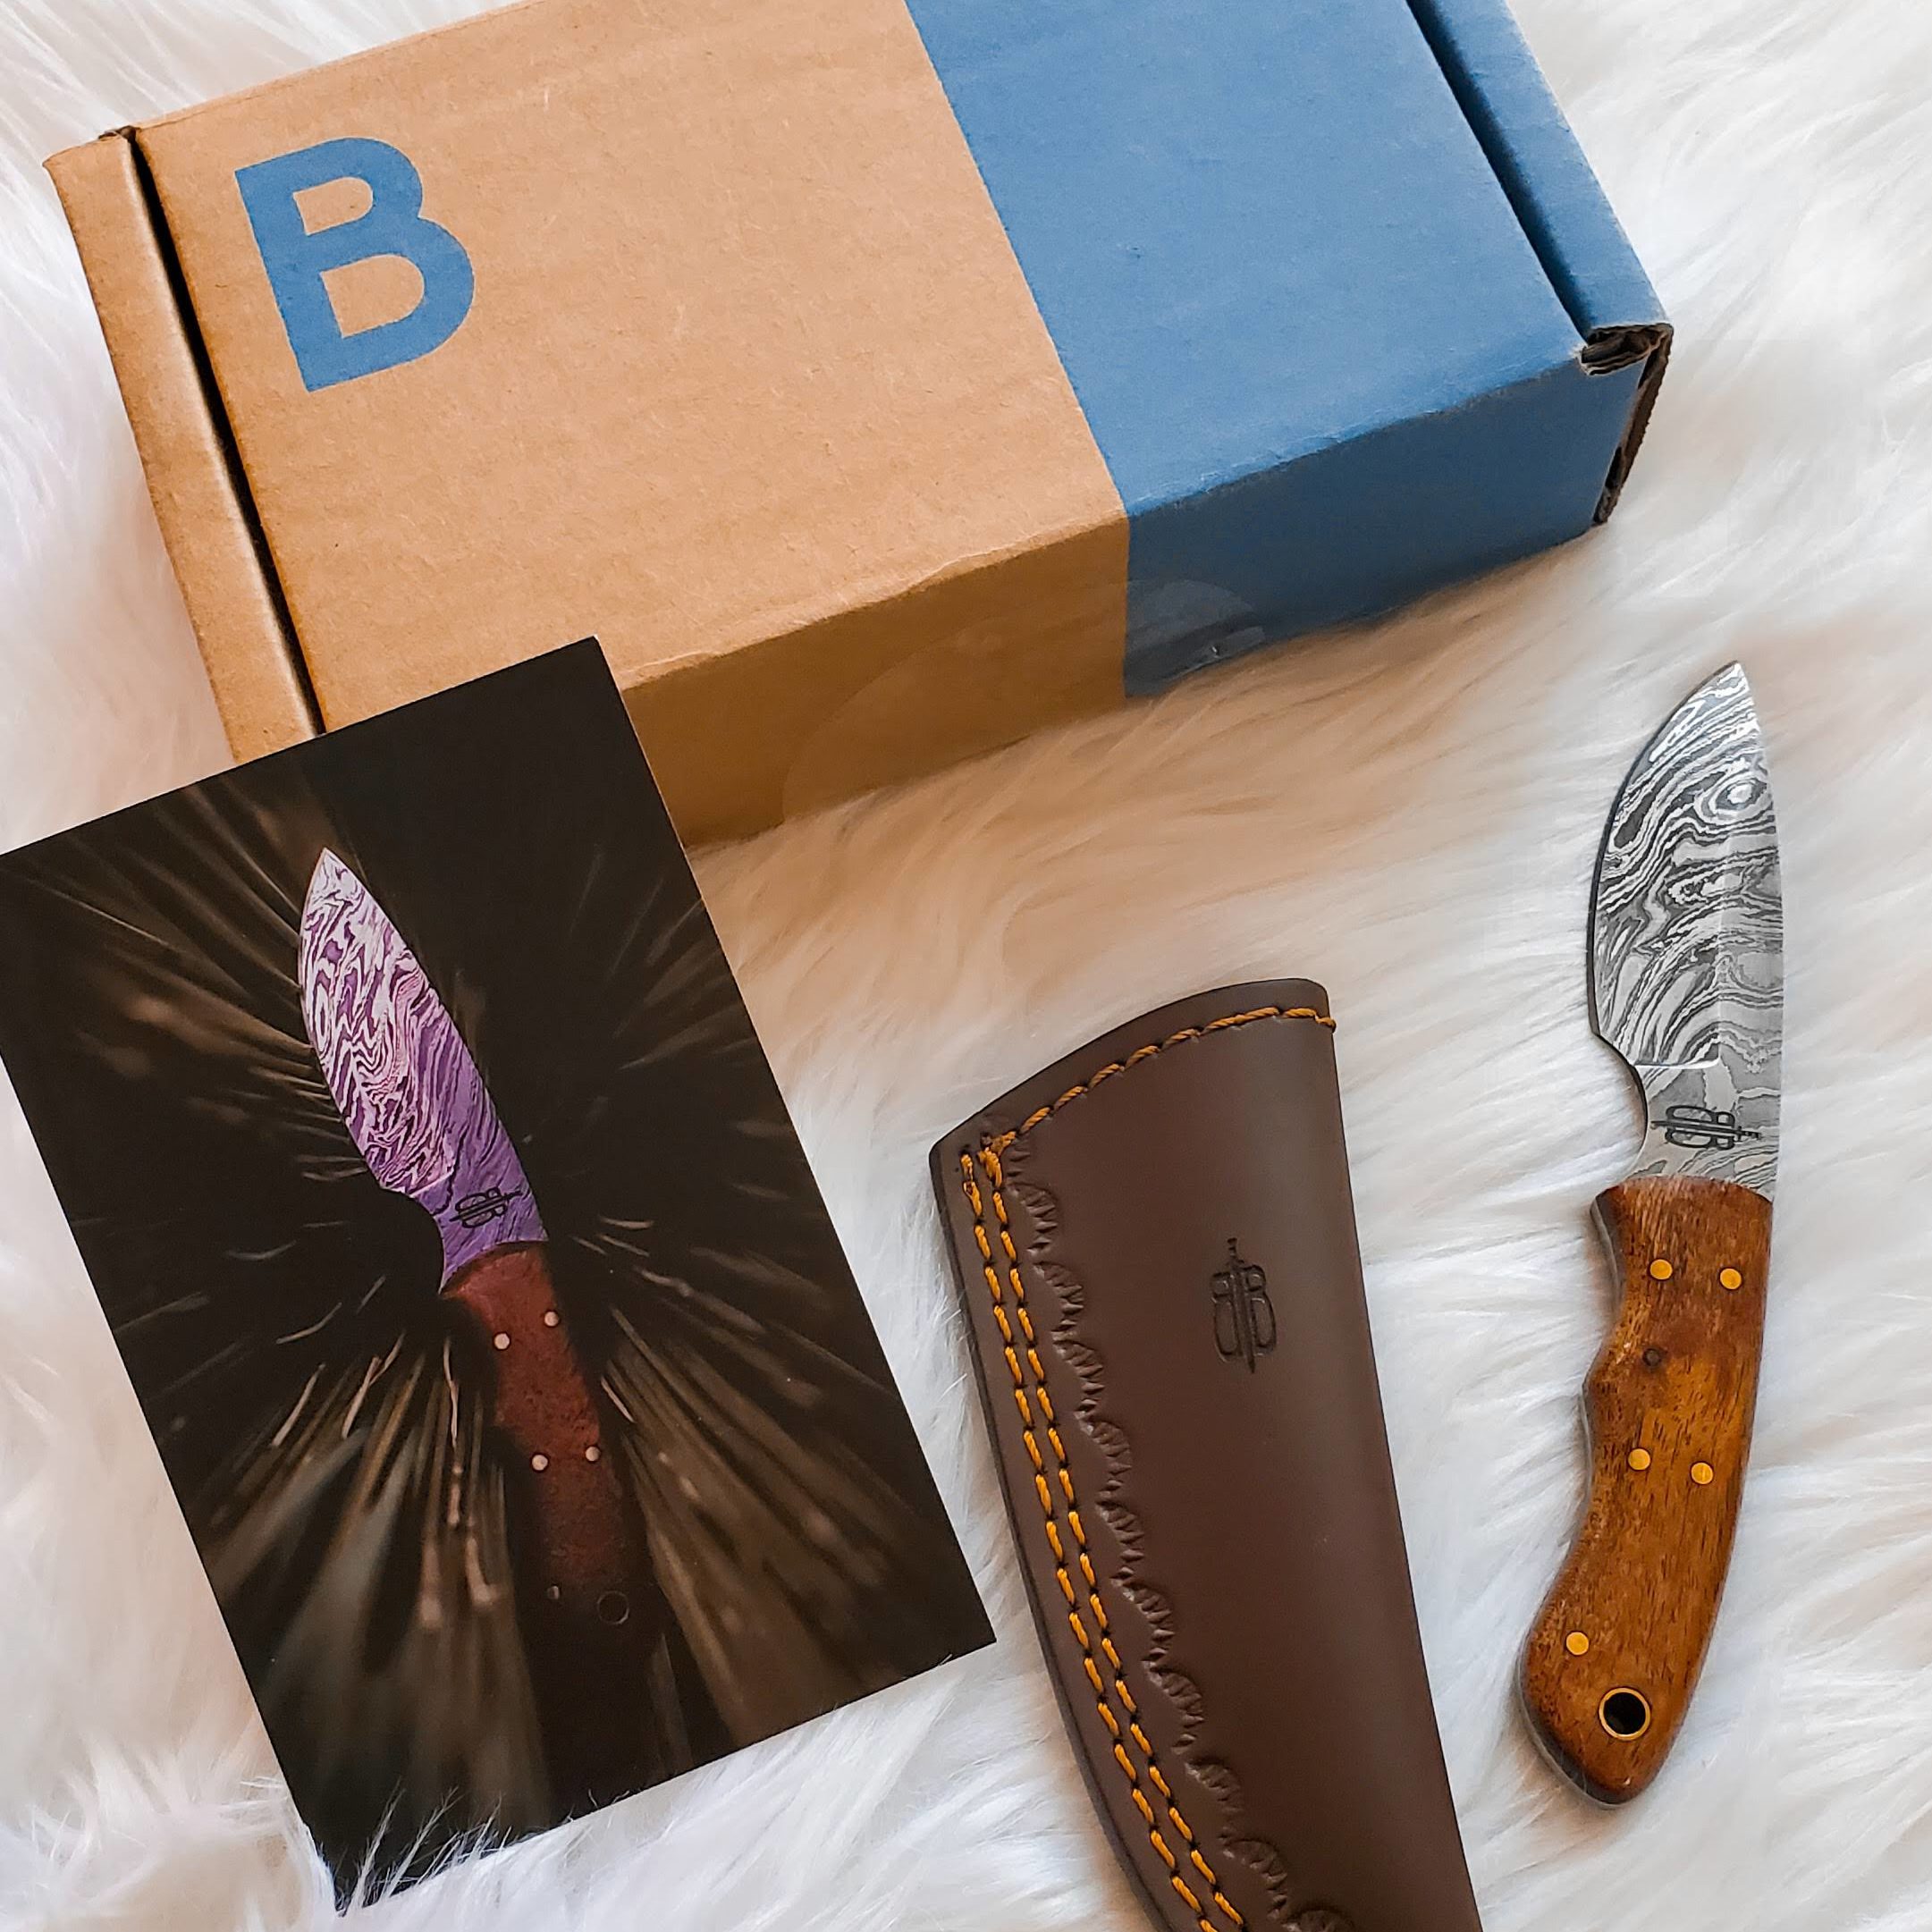 Why Bespoke Post Will Be Your New Favorite Subscription Box